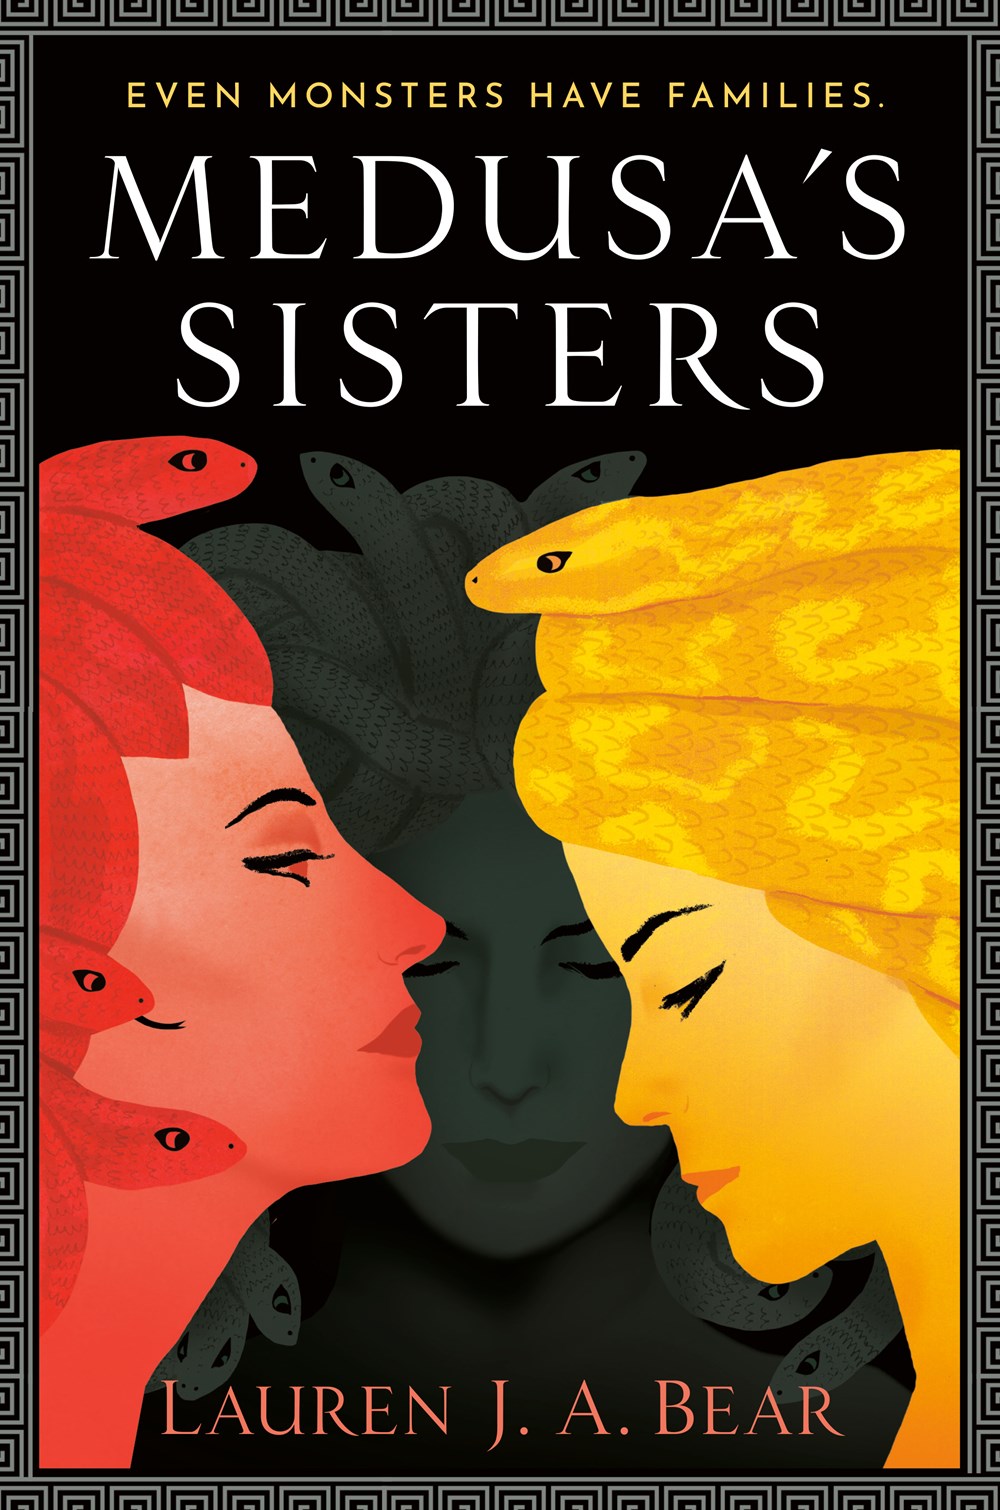 ‘Medusa’s Sisters’ by Lauren J.A. Bear | SFF Debut of the Month